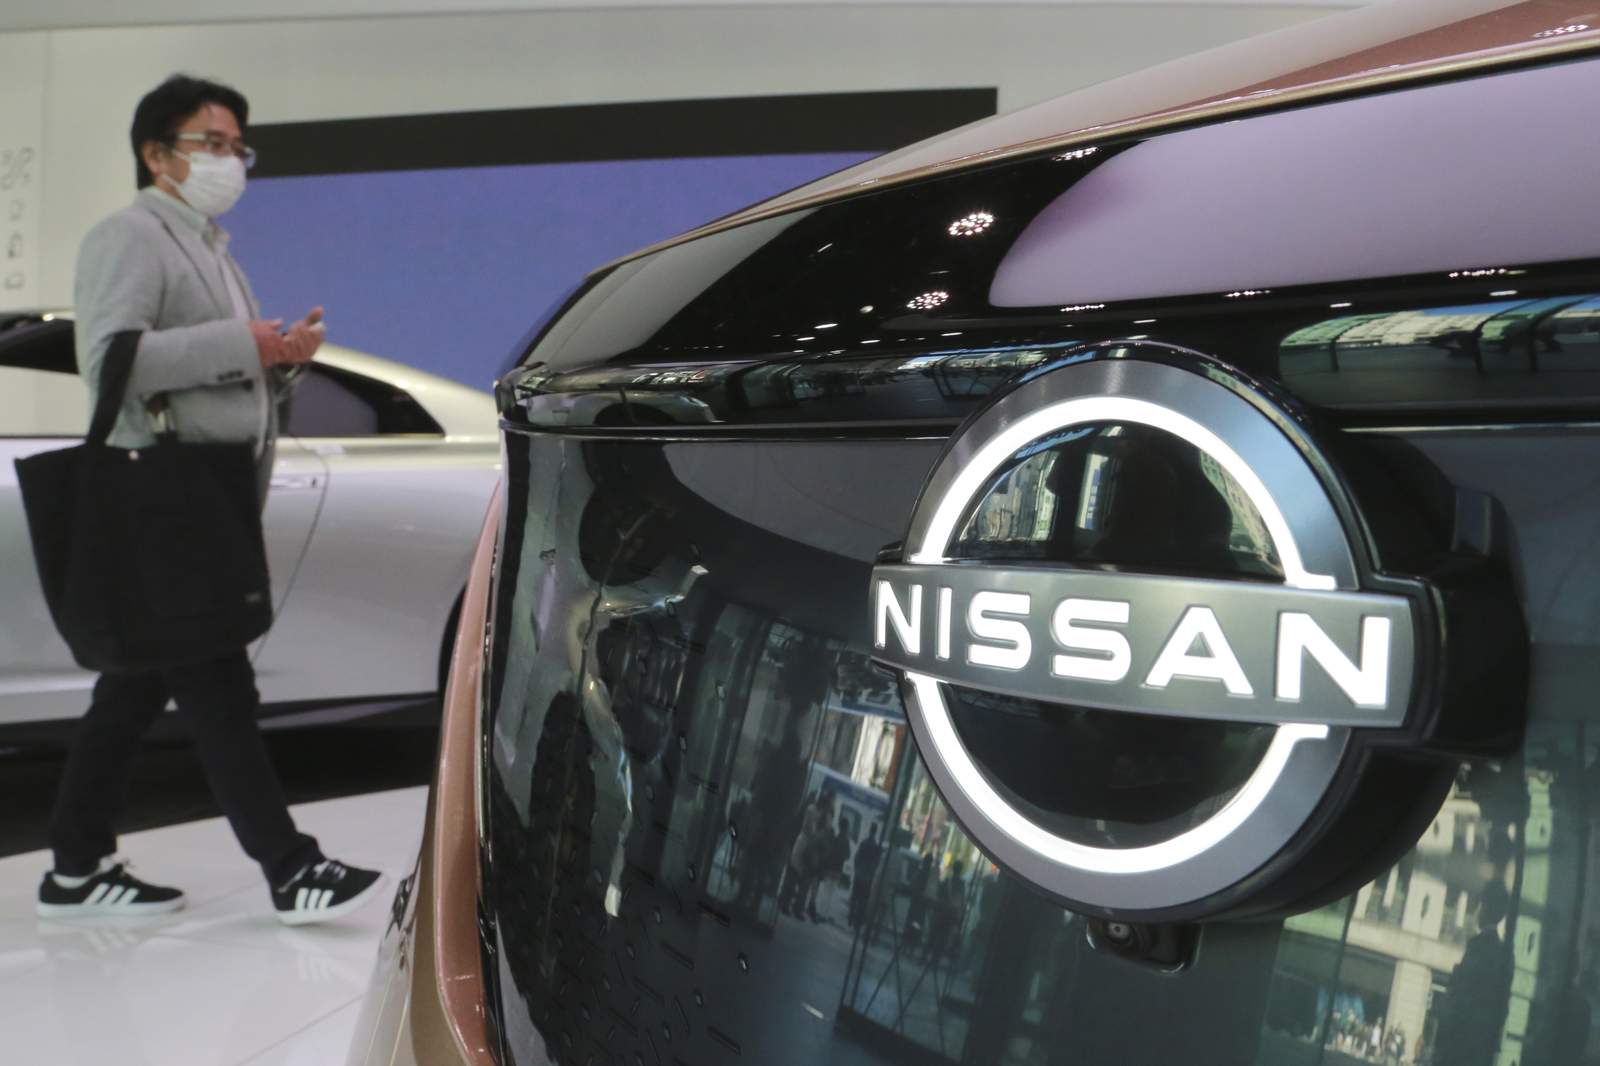 Japanese automaker Nissan posts loss amid pandemic, scandal